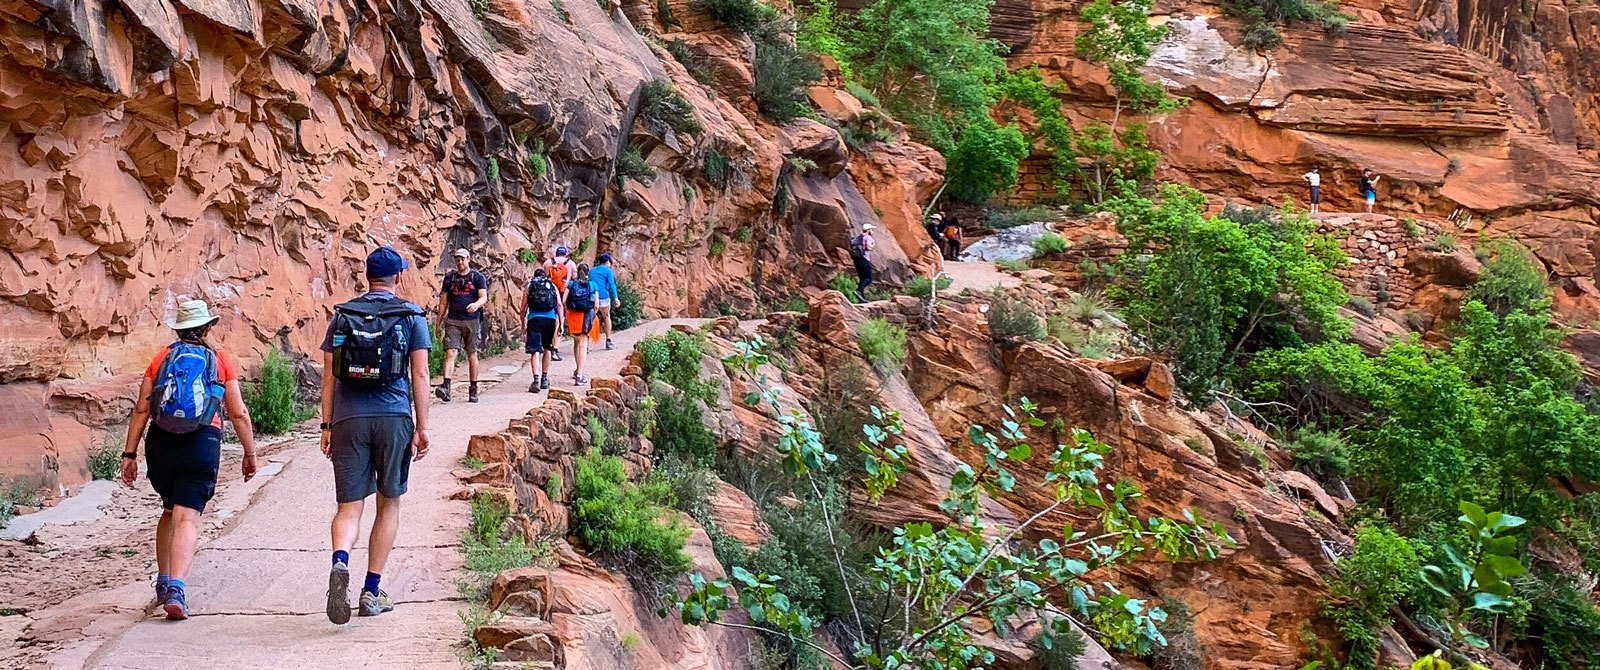 hikers starting the walk up to Angel's Landing in Zion National Park